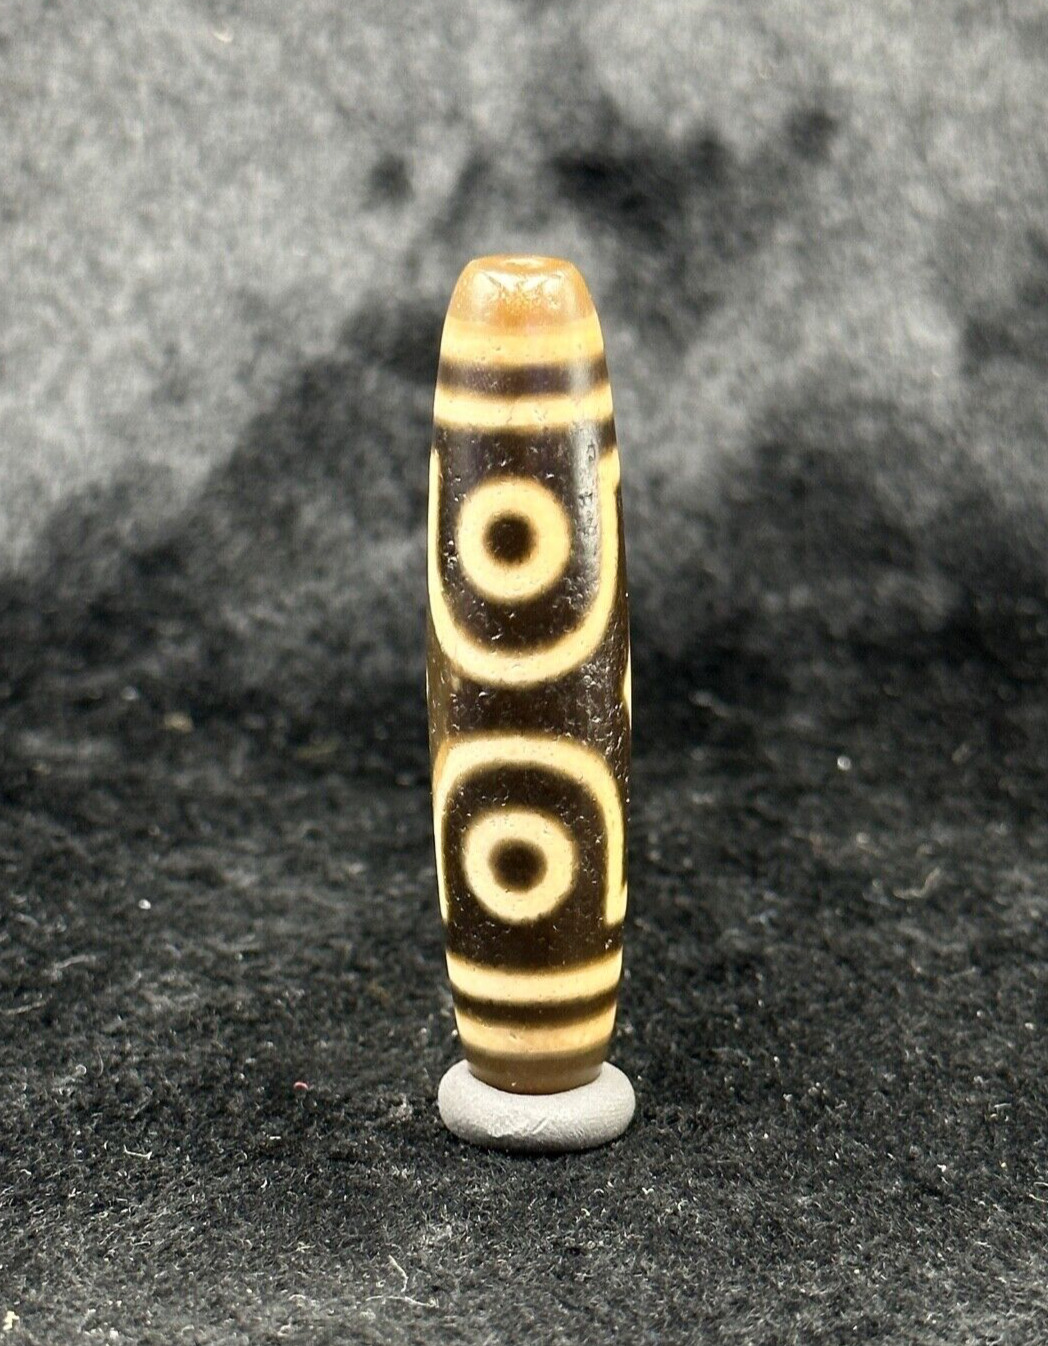 Unique Genuine Ancient Natural Indo Tibetan Agate Dzi Old Bead With 3 Eyes